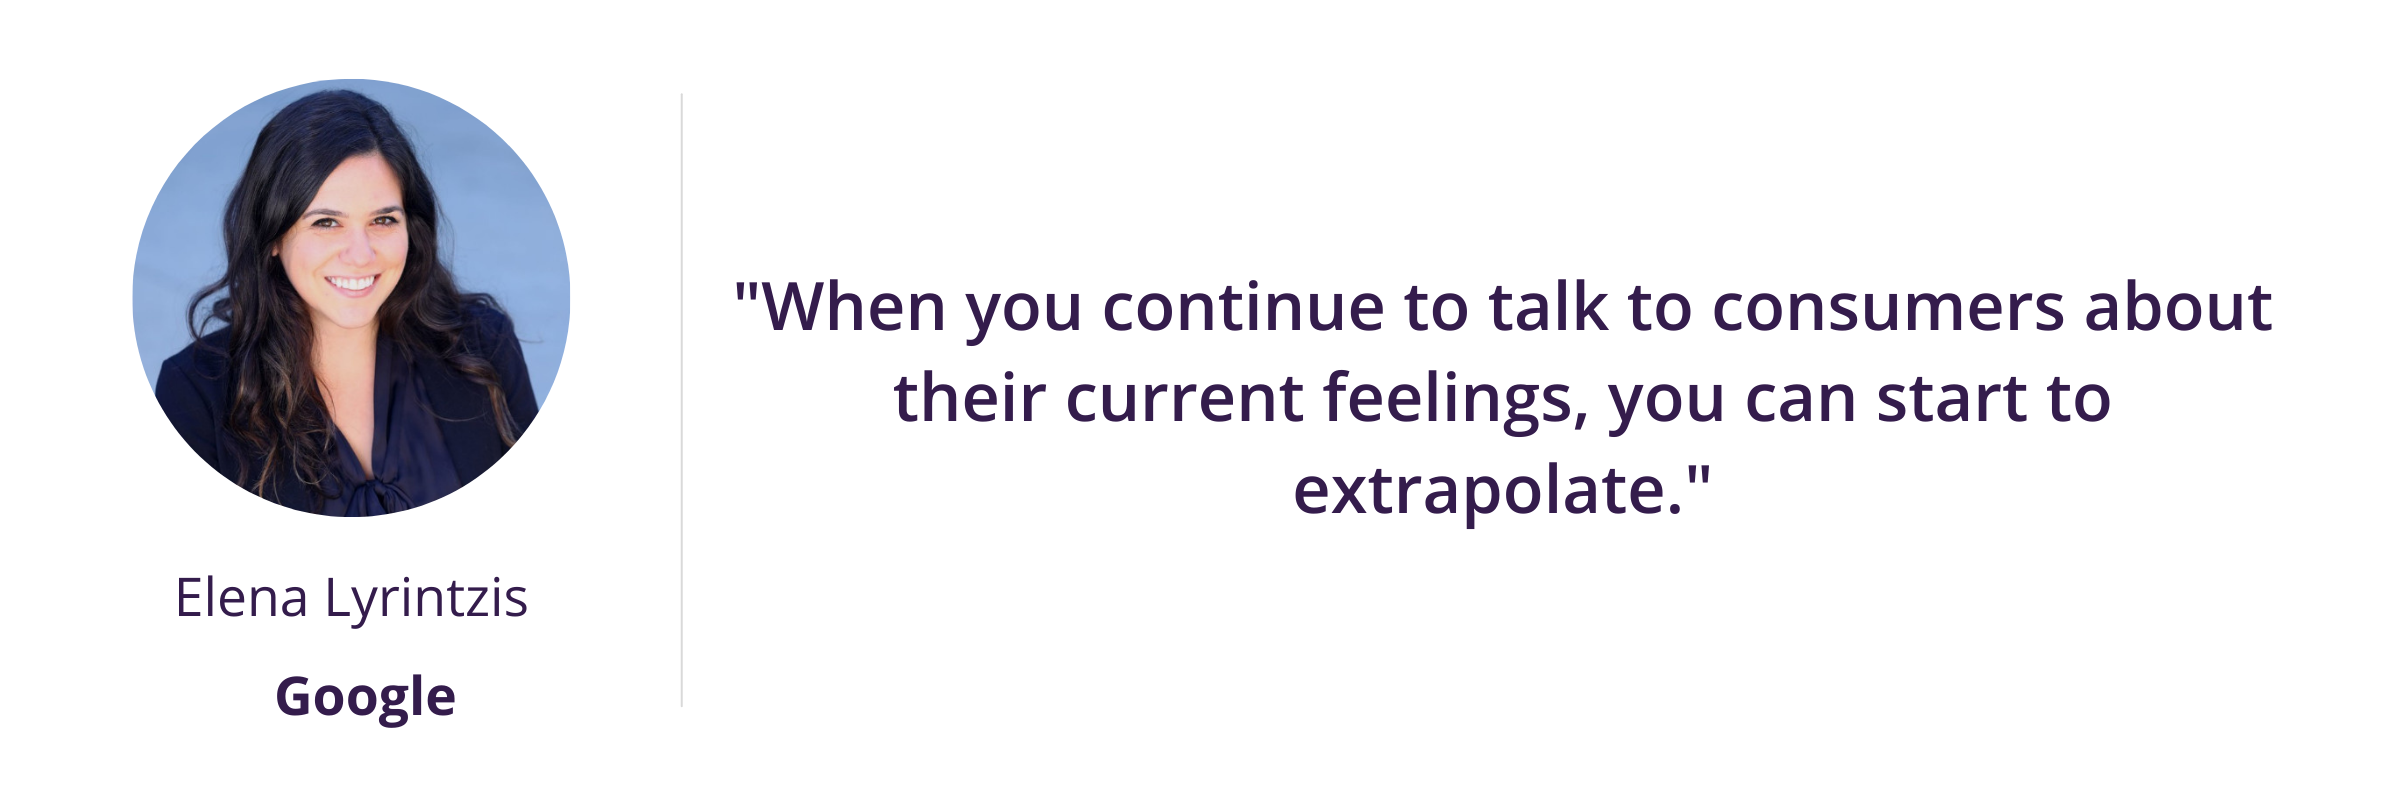 "When you continue to talk to consumers about their current feelings, you can start to extrapolate."